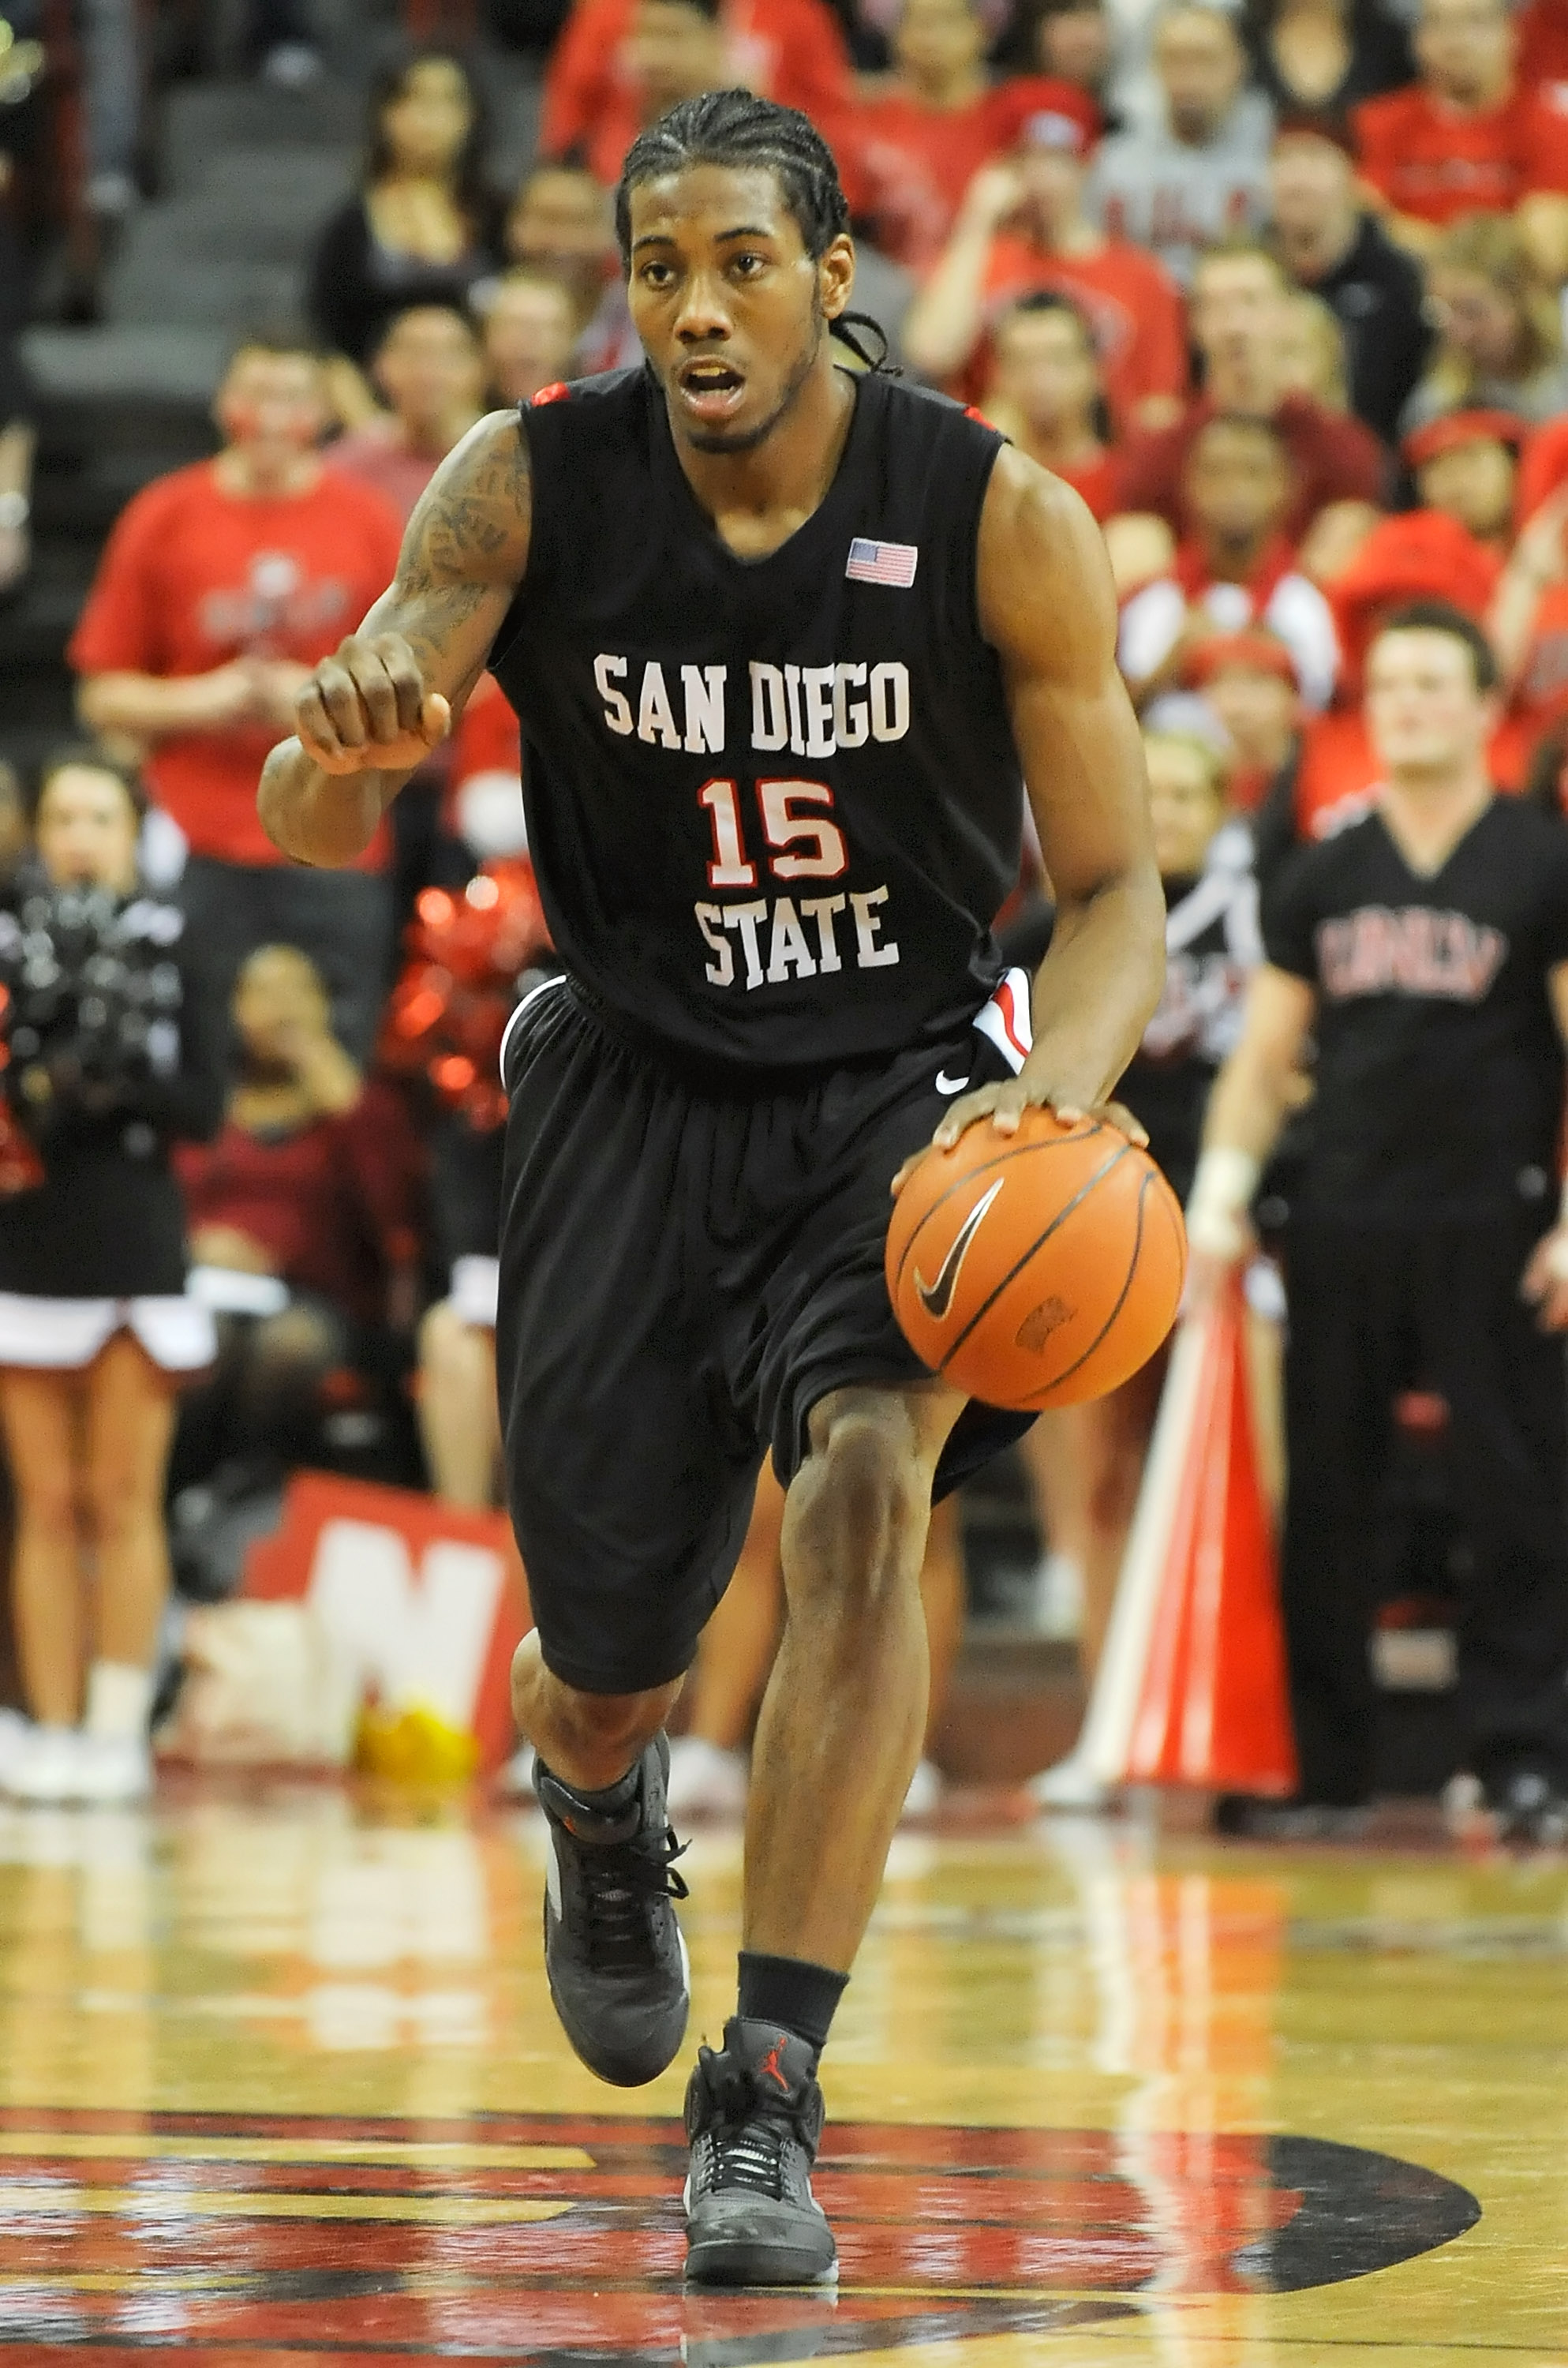 LAS VEGAS - JANUARY 13:  Kawhi Leonard #15 of the San Diego State Aztecs brings the ball up the court during a game against the UNLV Rebels at the Thomas & Mack Center January 13, 2009 in Las Vegas, Nevada. The Rebels defeated the Aztecs 76-66.  (Photo by